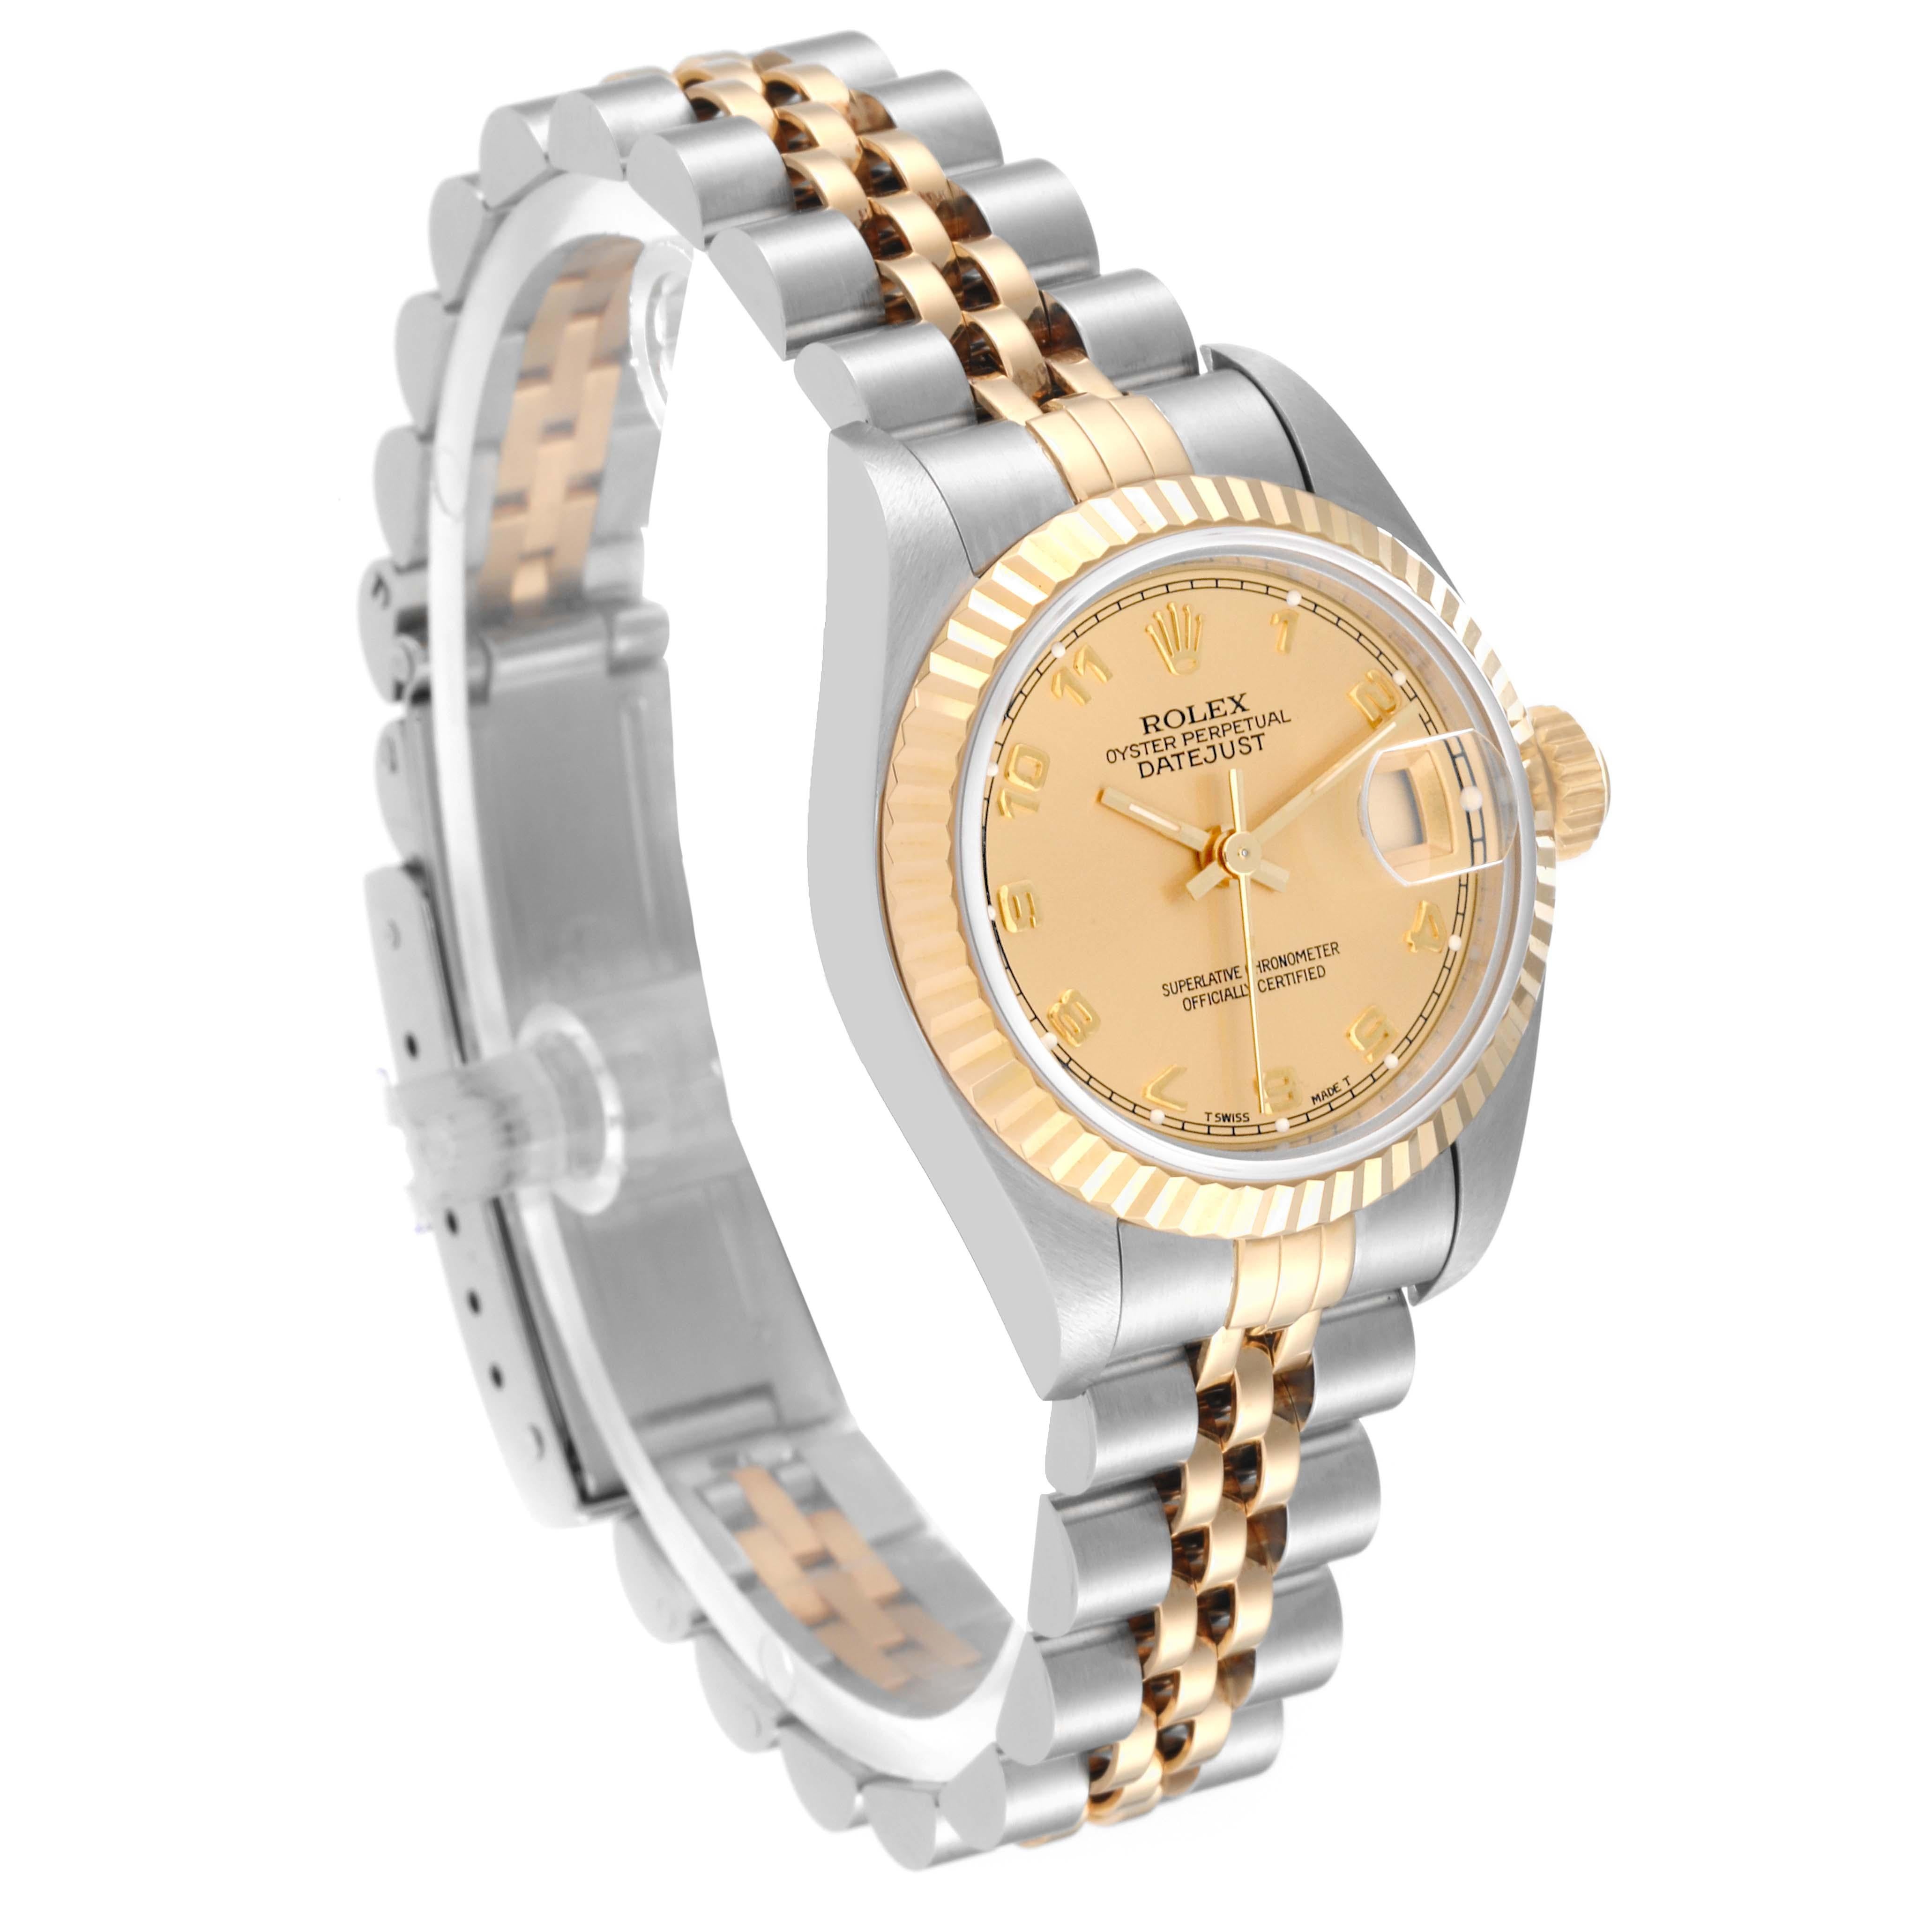 Rolex Datejust Steel Yellow Gold Champagne Arabic Dial Ladies Watch 69173 In Excellent Condition For Sale In Atlanta, GA